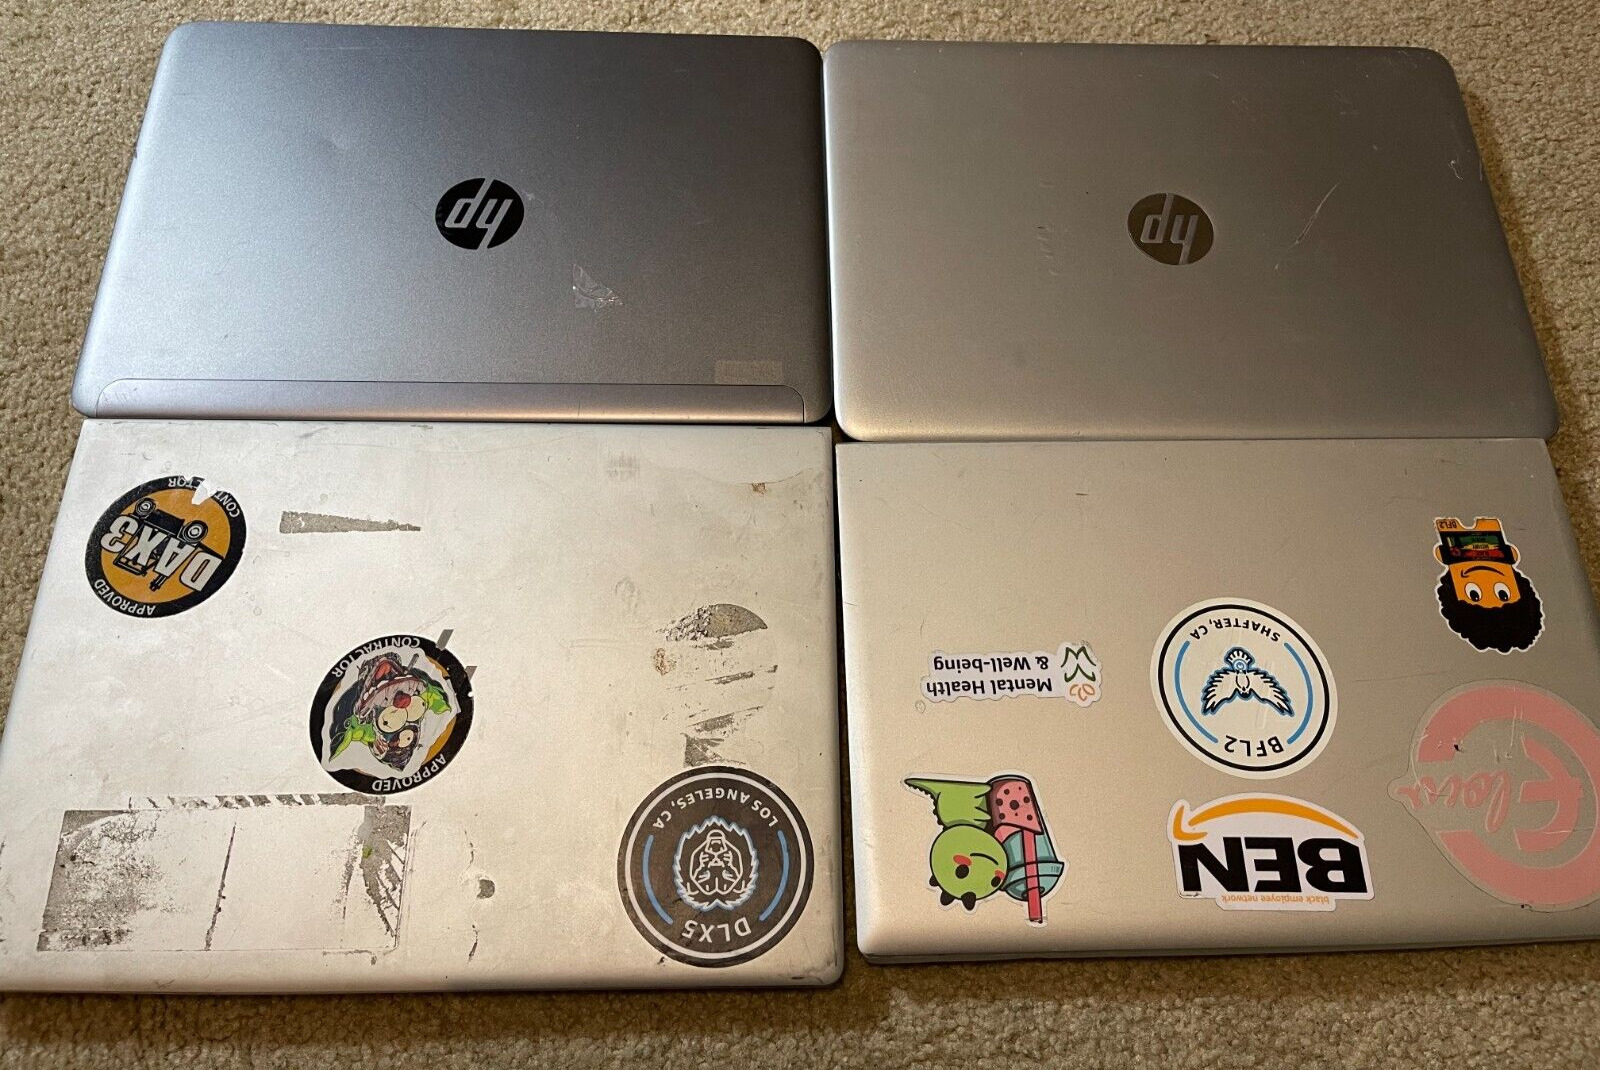 Lot of 4 laptops - 4x HP, Untested As Is